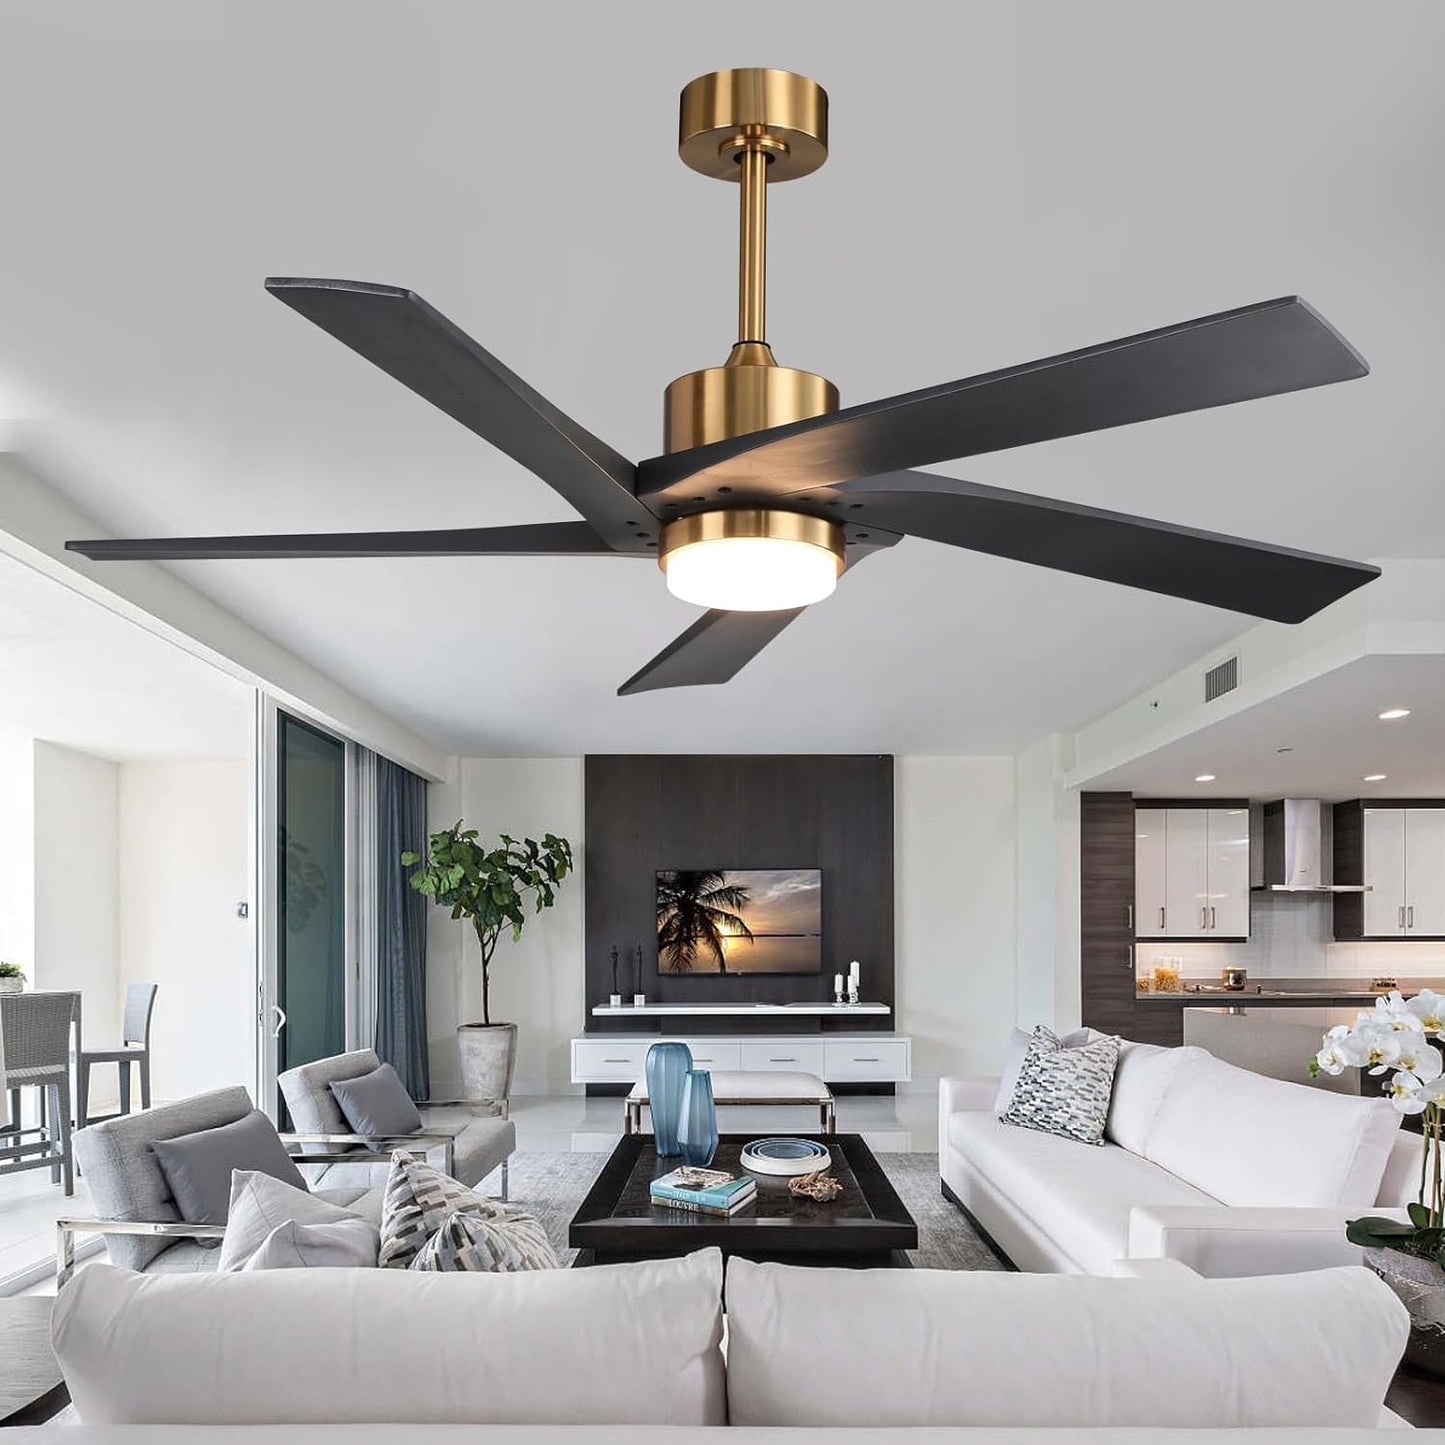 Ceiling Fans with Lights 54 Inch DC Ceiling Fan with Lights Remote Control 5 Reversible Carved Wood Blades Fandelier Ceiling Fan with Light 6-Speed Noiseless Ceiling Fan in Brass Finish with Blades